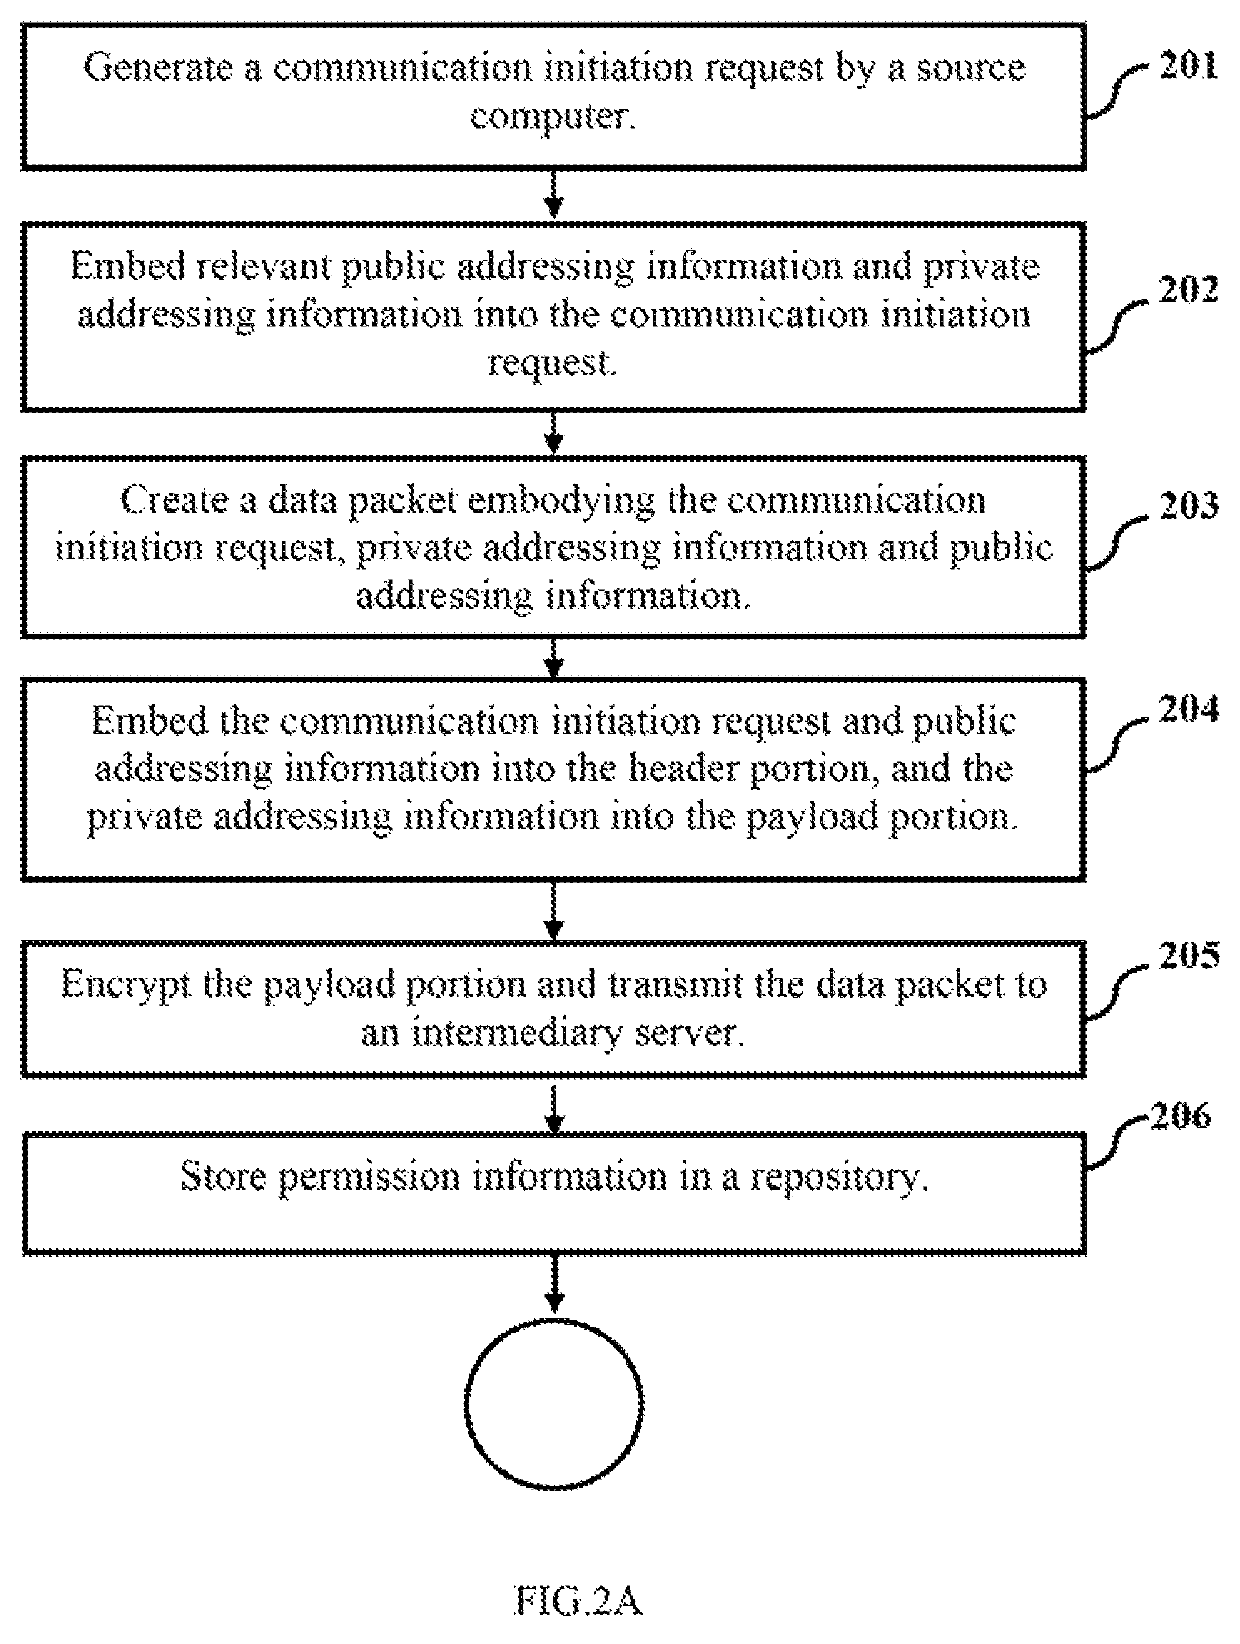 System and method for enhancing the security of data packets exchanged across a computer network